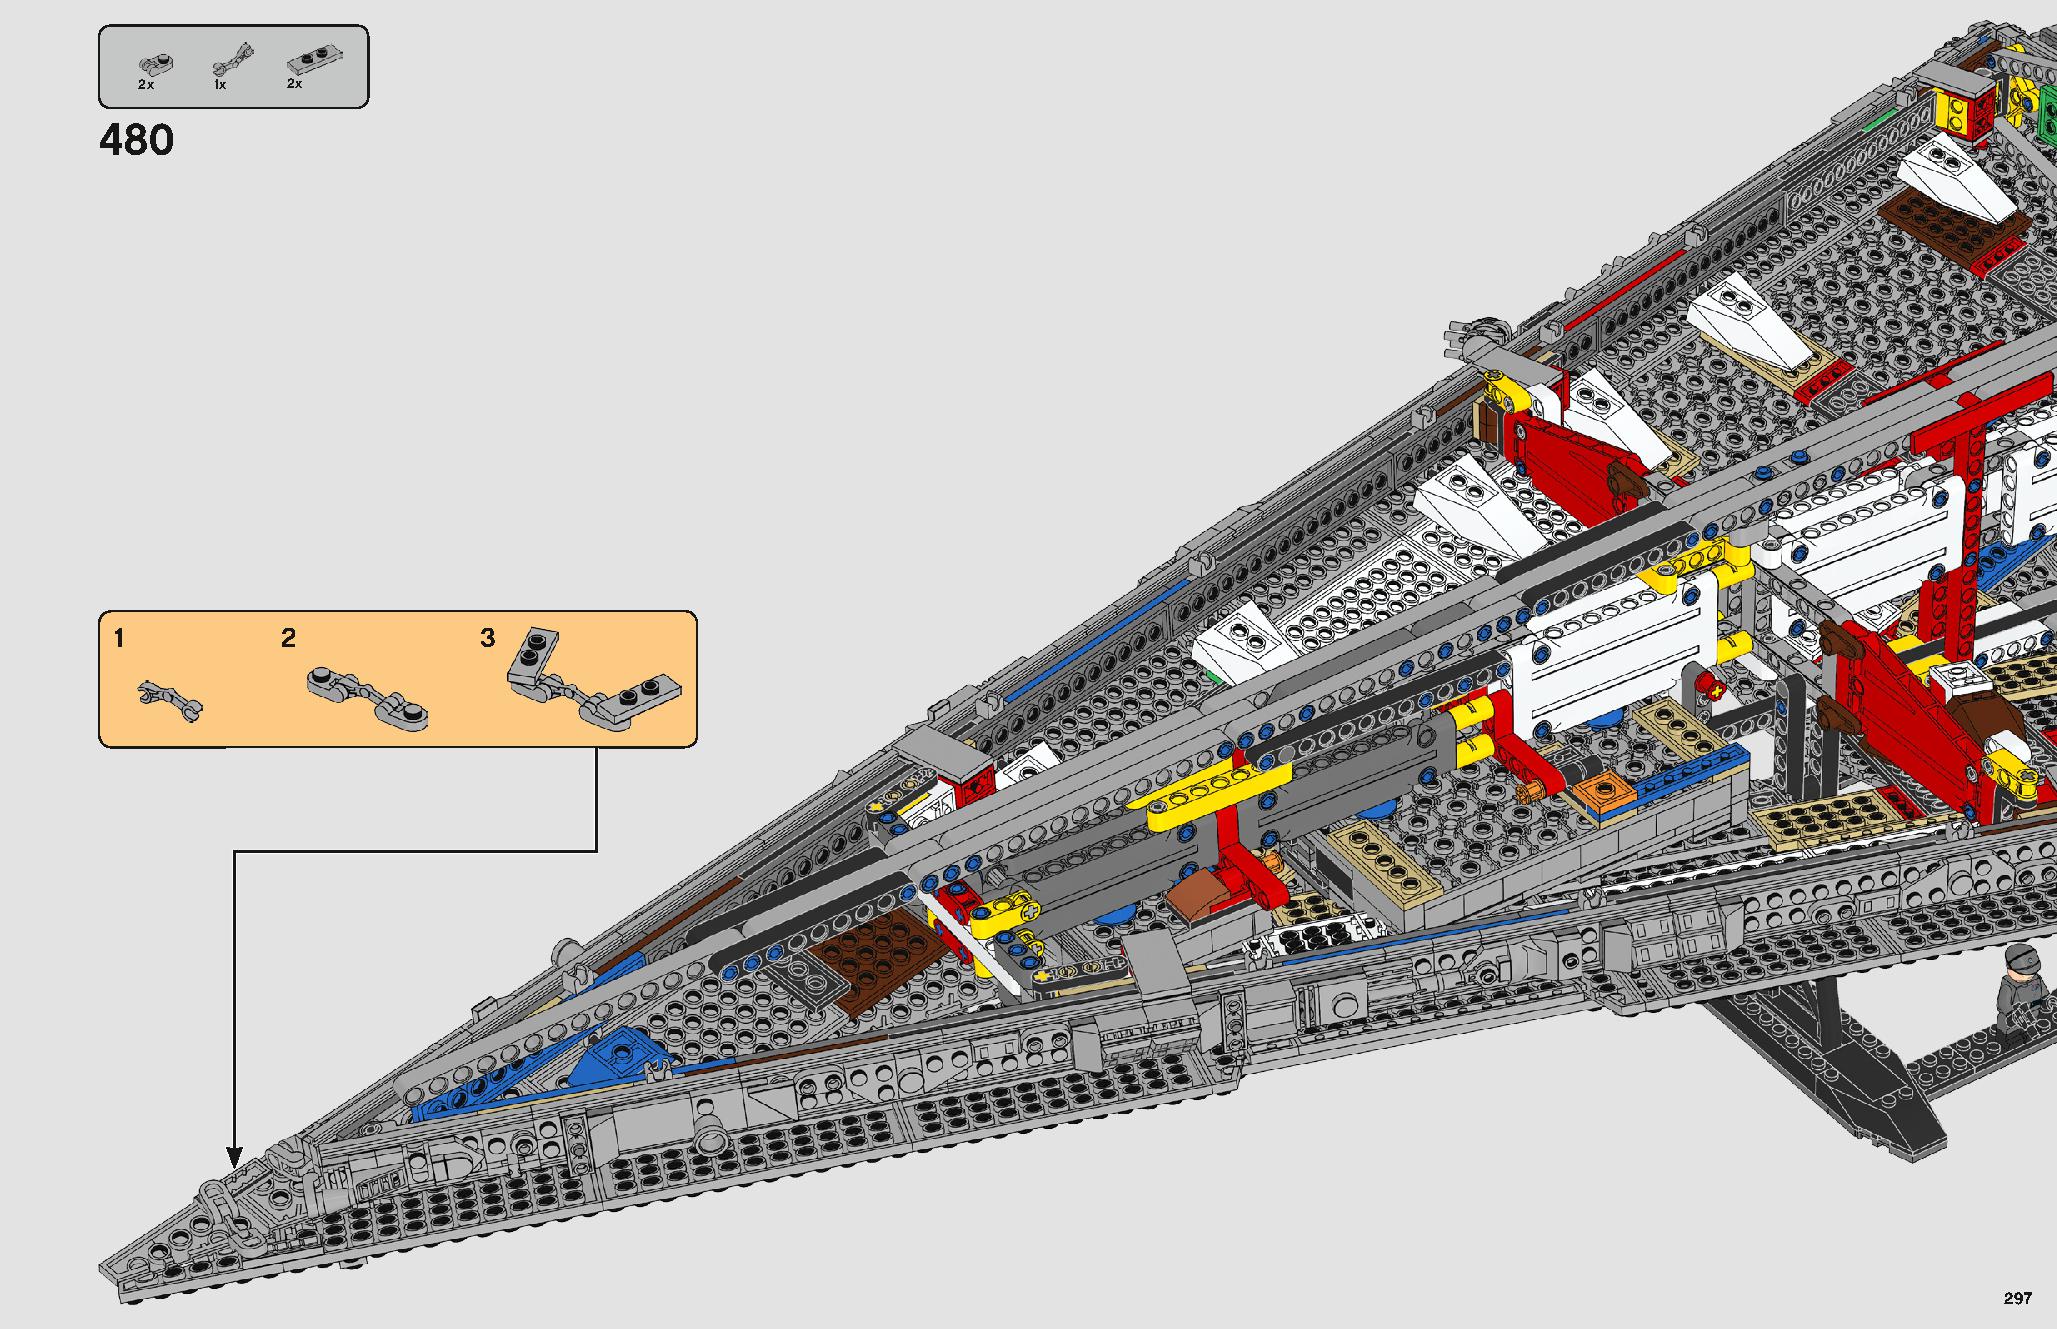 Imperial Star Destroyer 75252 LEGO information LEGO instructions 297 page